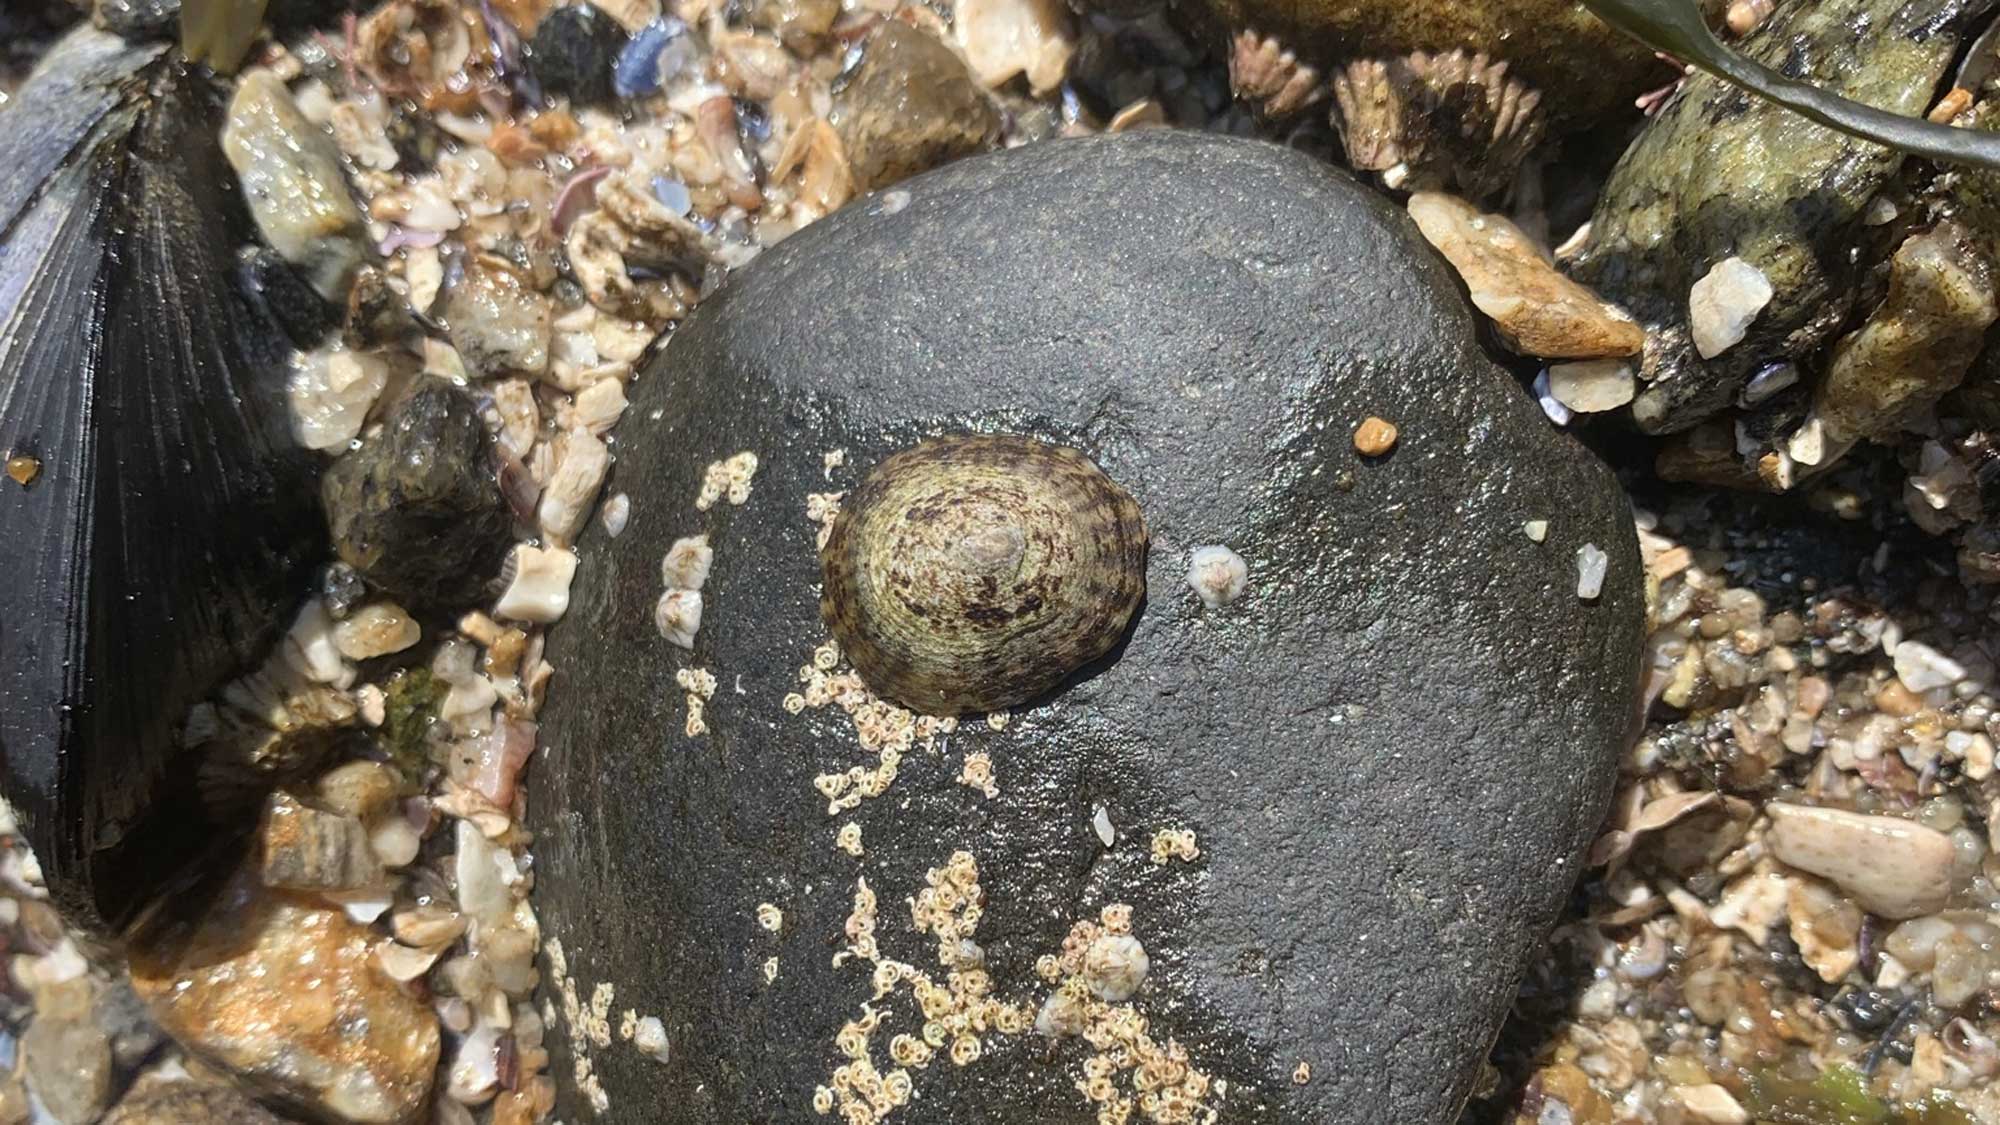 Photograph of a limpet secured to a rock during low tide.